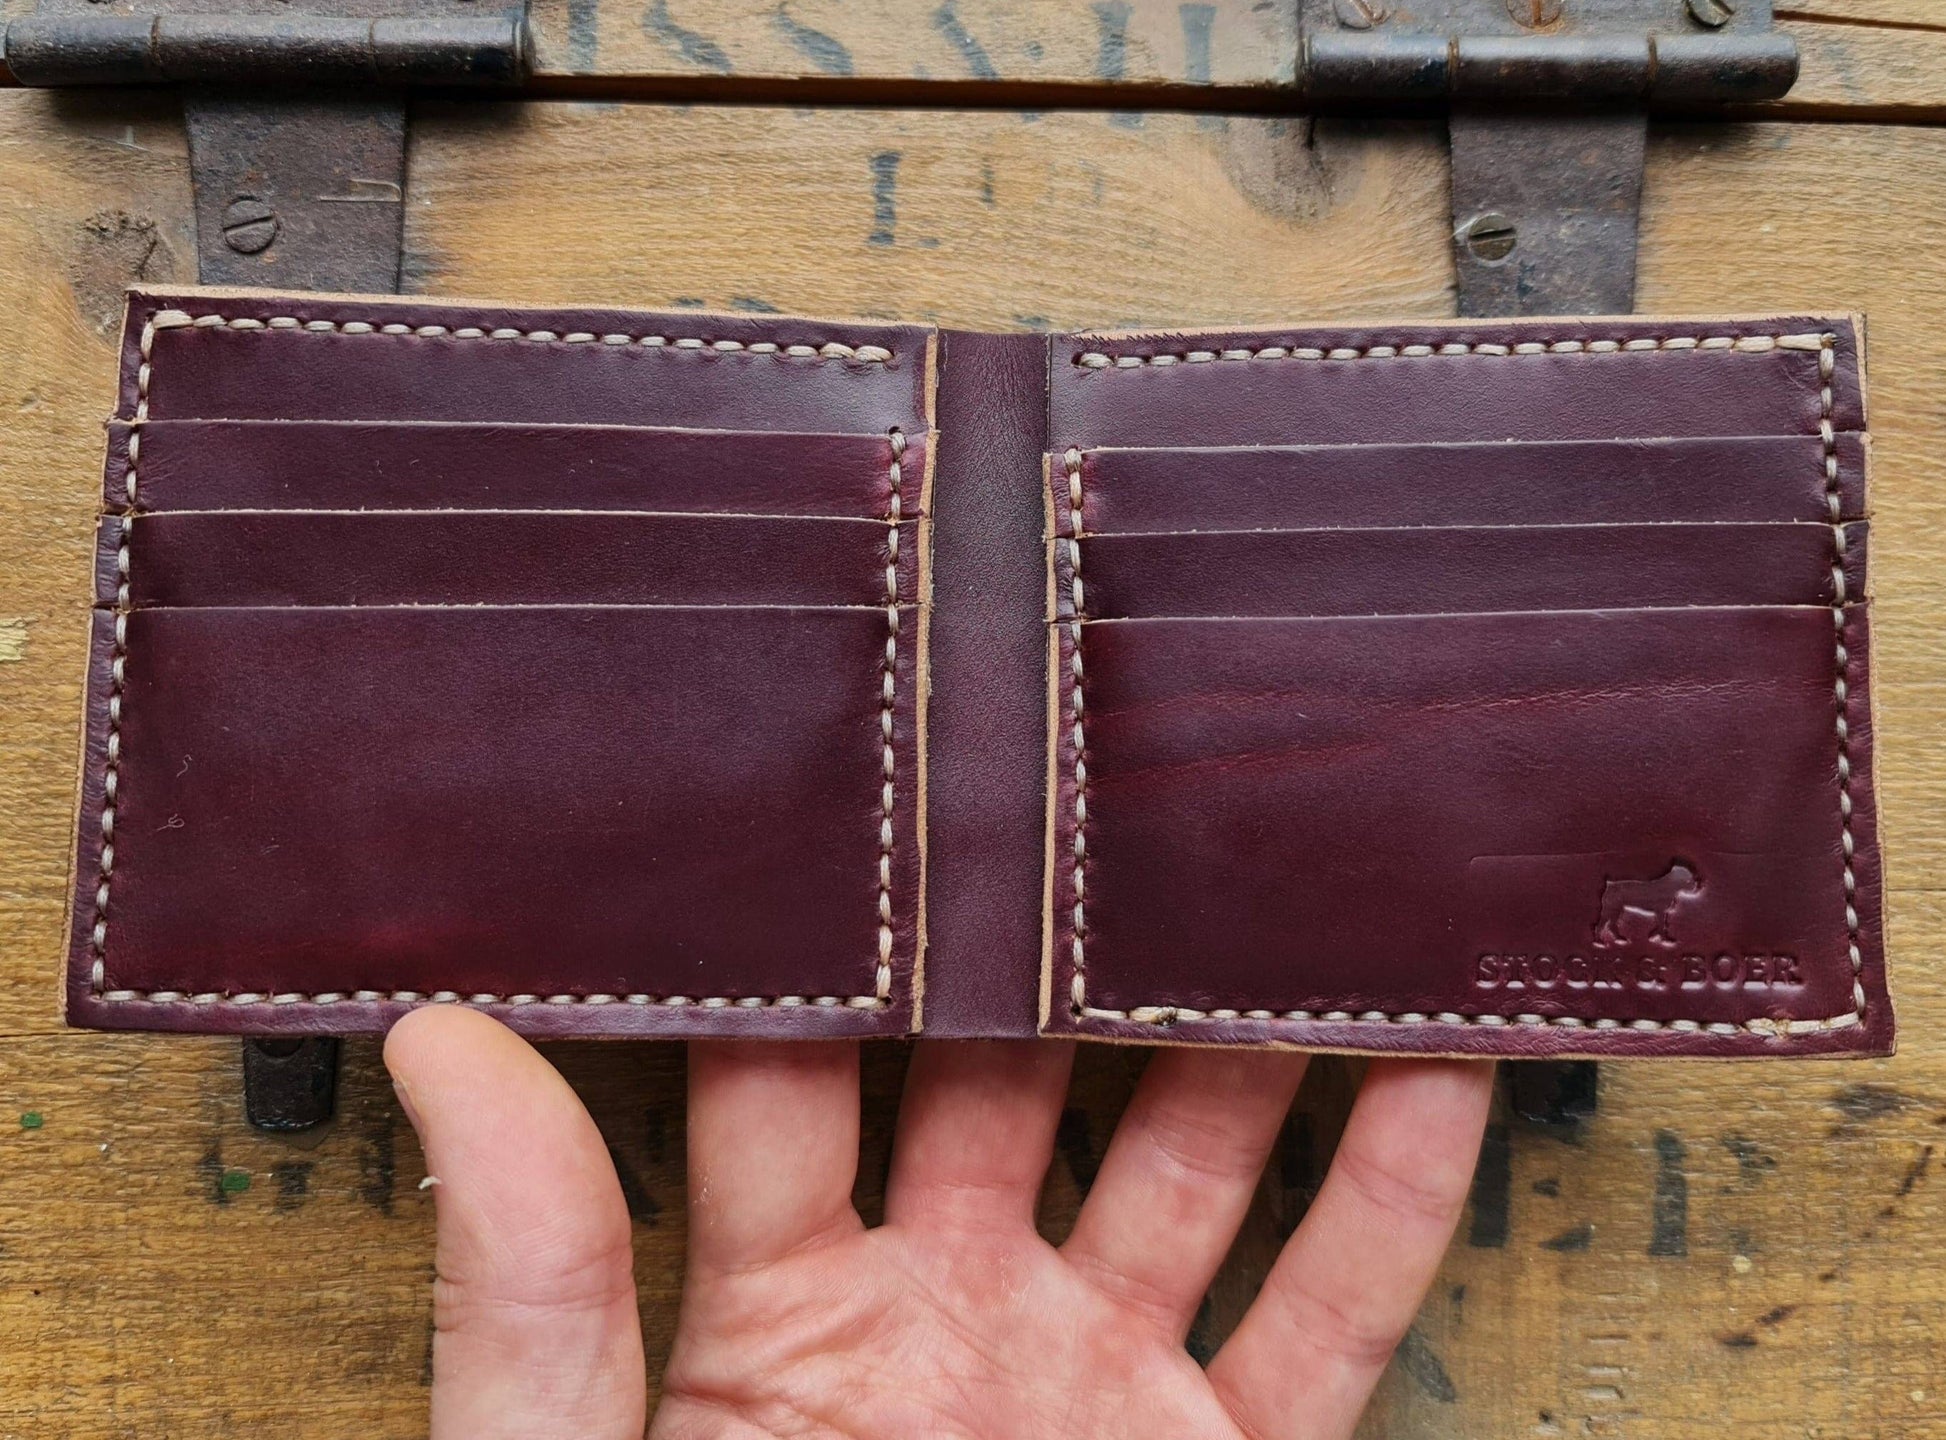 No. 1 Wrangler Card Holders, Horween Burgundy Chromexcel Leather, Front Open